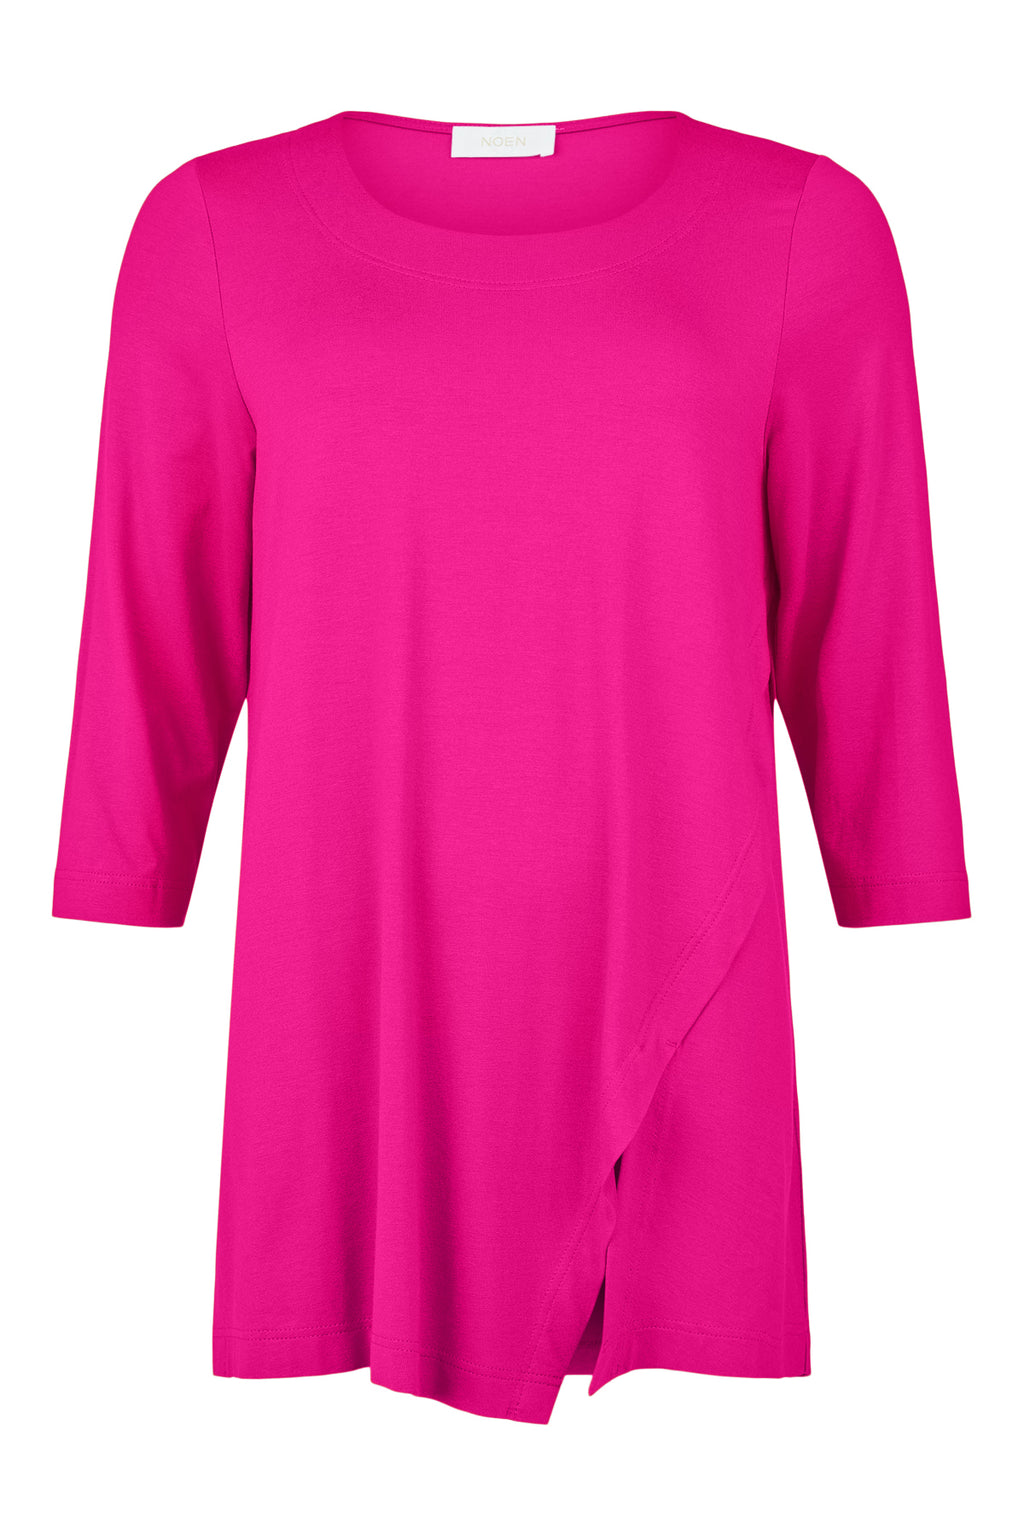 Upgrade Your Wardrobe with Noen Fashion Brand's Pink Soft Touch Jersey Top. Featuring Front Detailing on the Left Hand Side and a Trendy Bracelet Length Sleeve, this Top is the Perfect Combination of Style and Comfort. Get Yours Today and Experience the Chic Scoop Neckline!